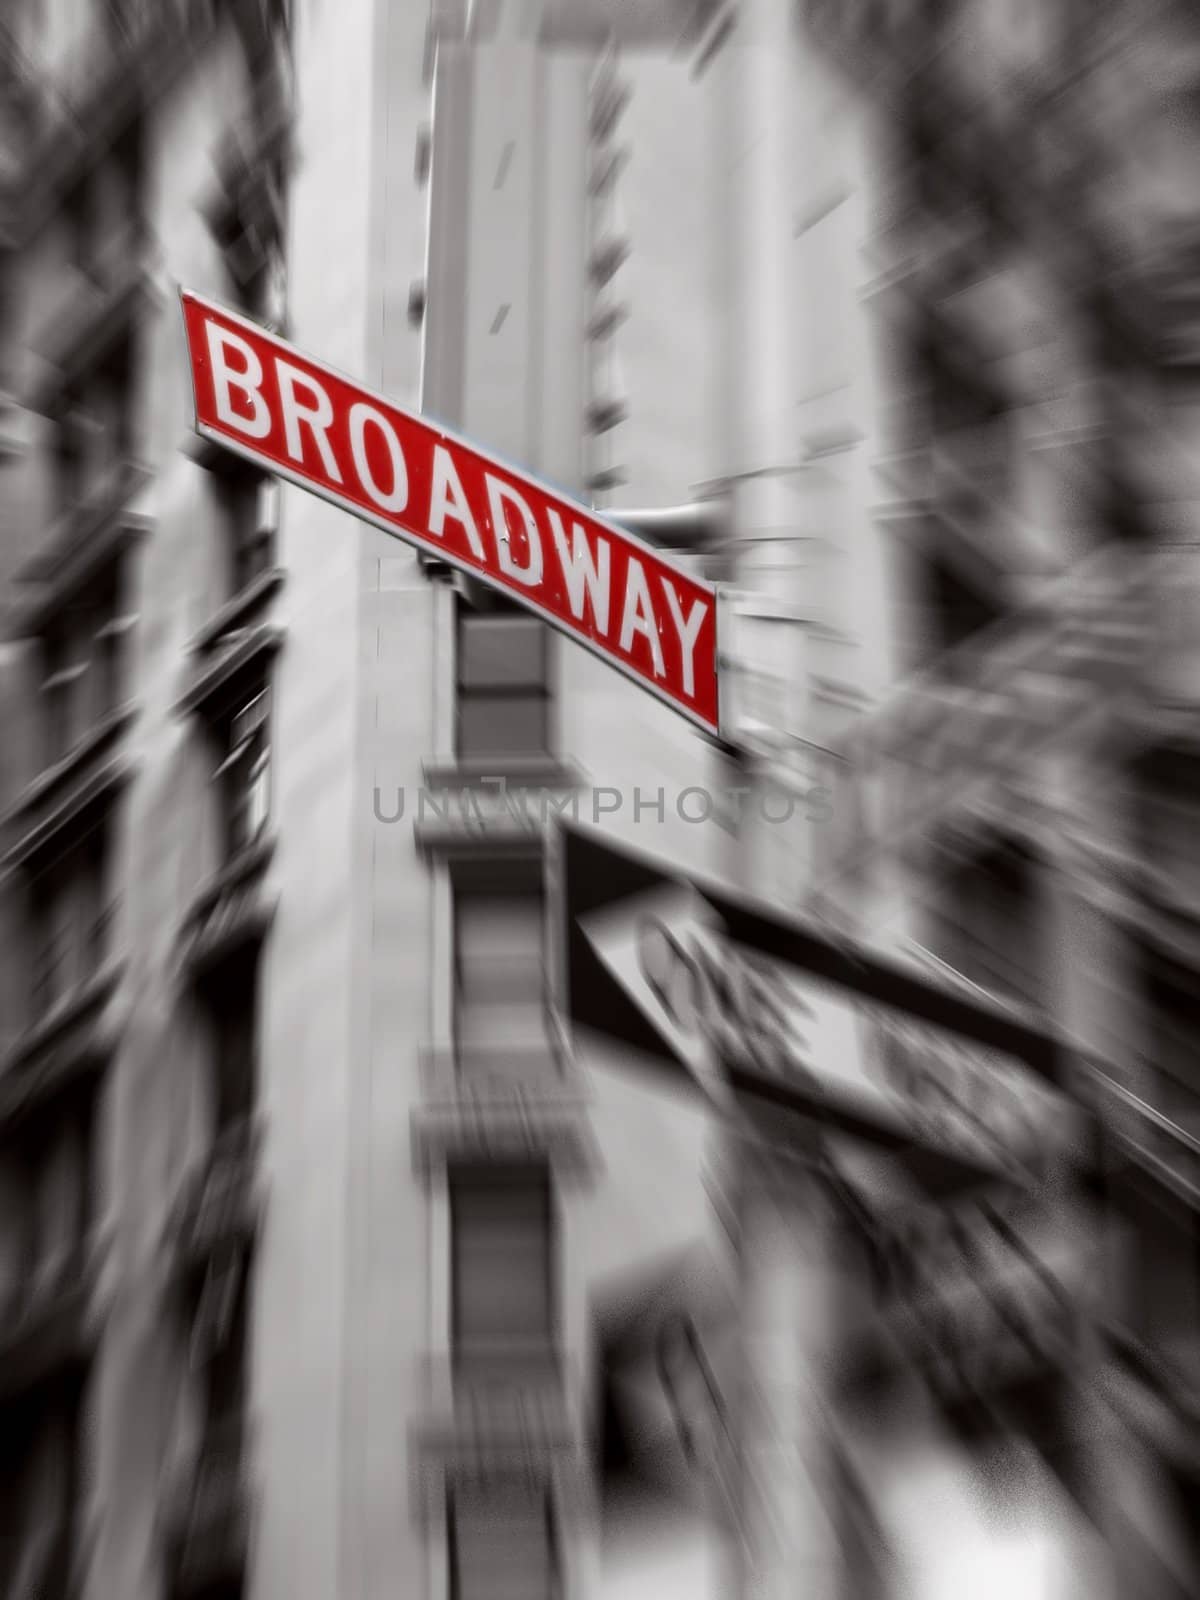 red broadway sign, black and white photo, zoom blur